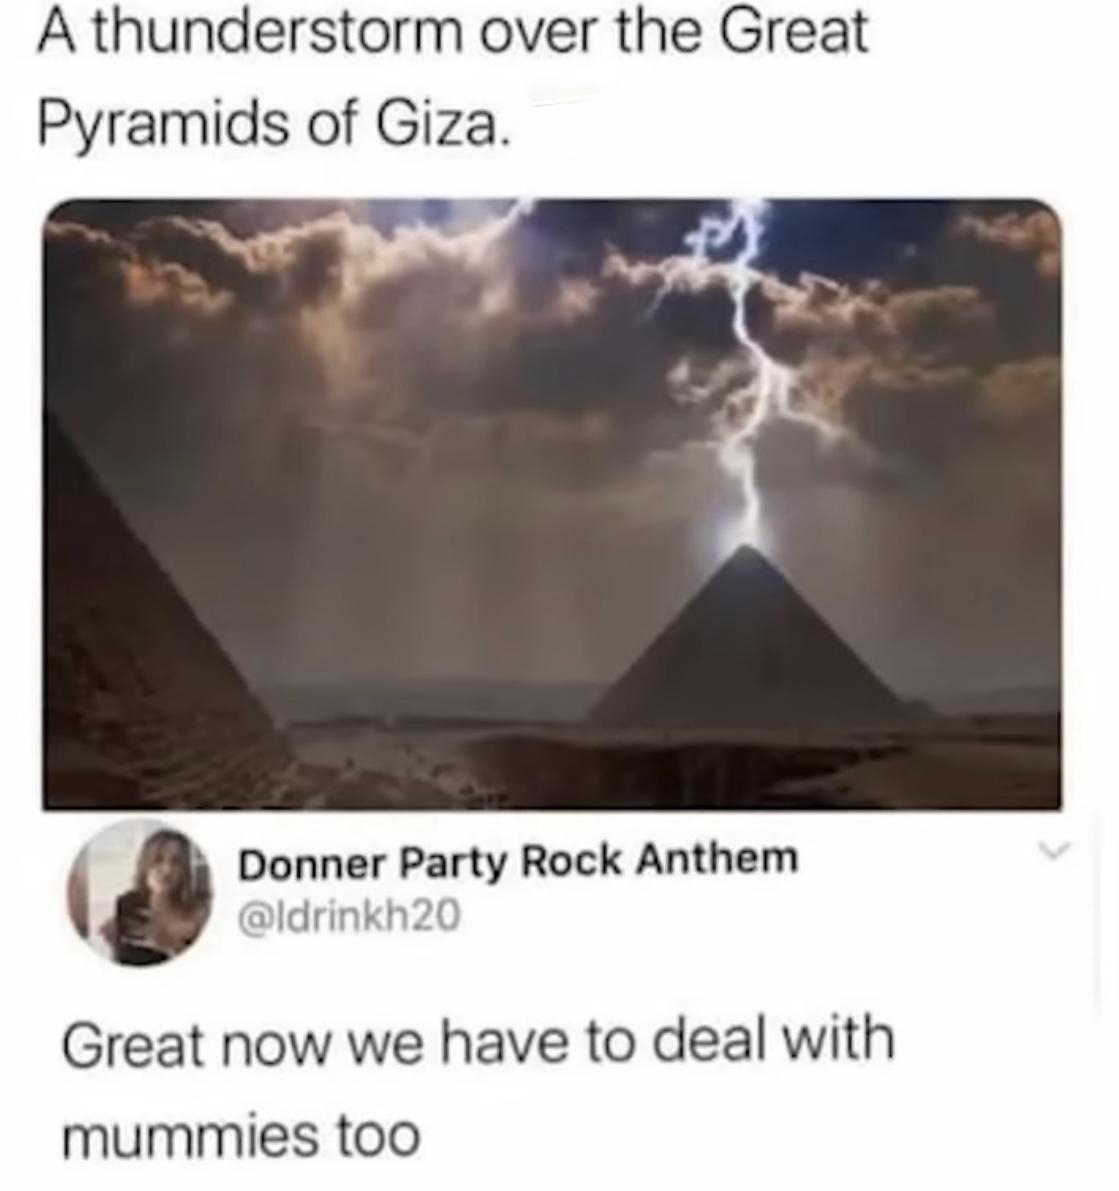 funny memes - thunderstorm in egypt - A thunderstorm over the Great Pyramids of Giza. Donner Party Rock Anthem Great now we have to deal with mummies too